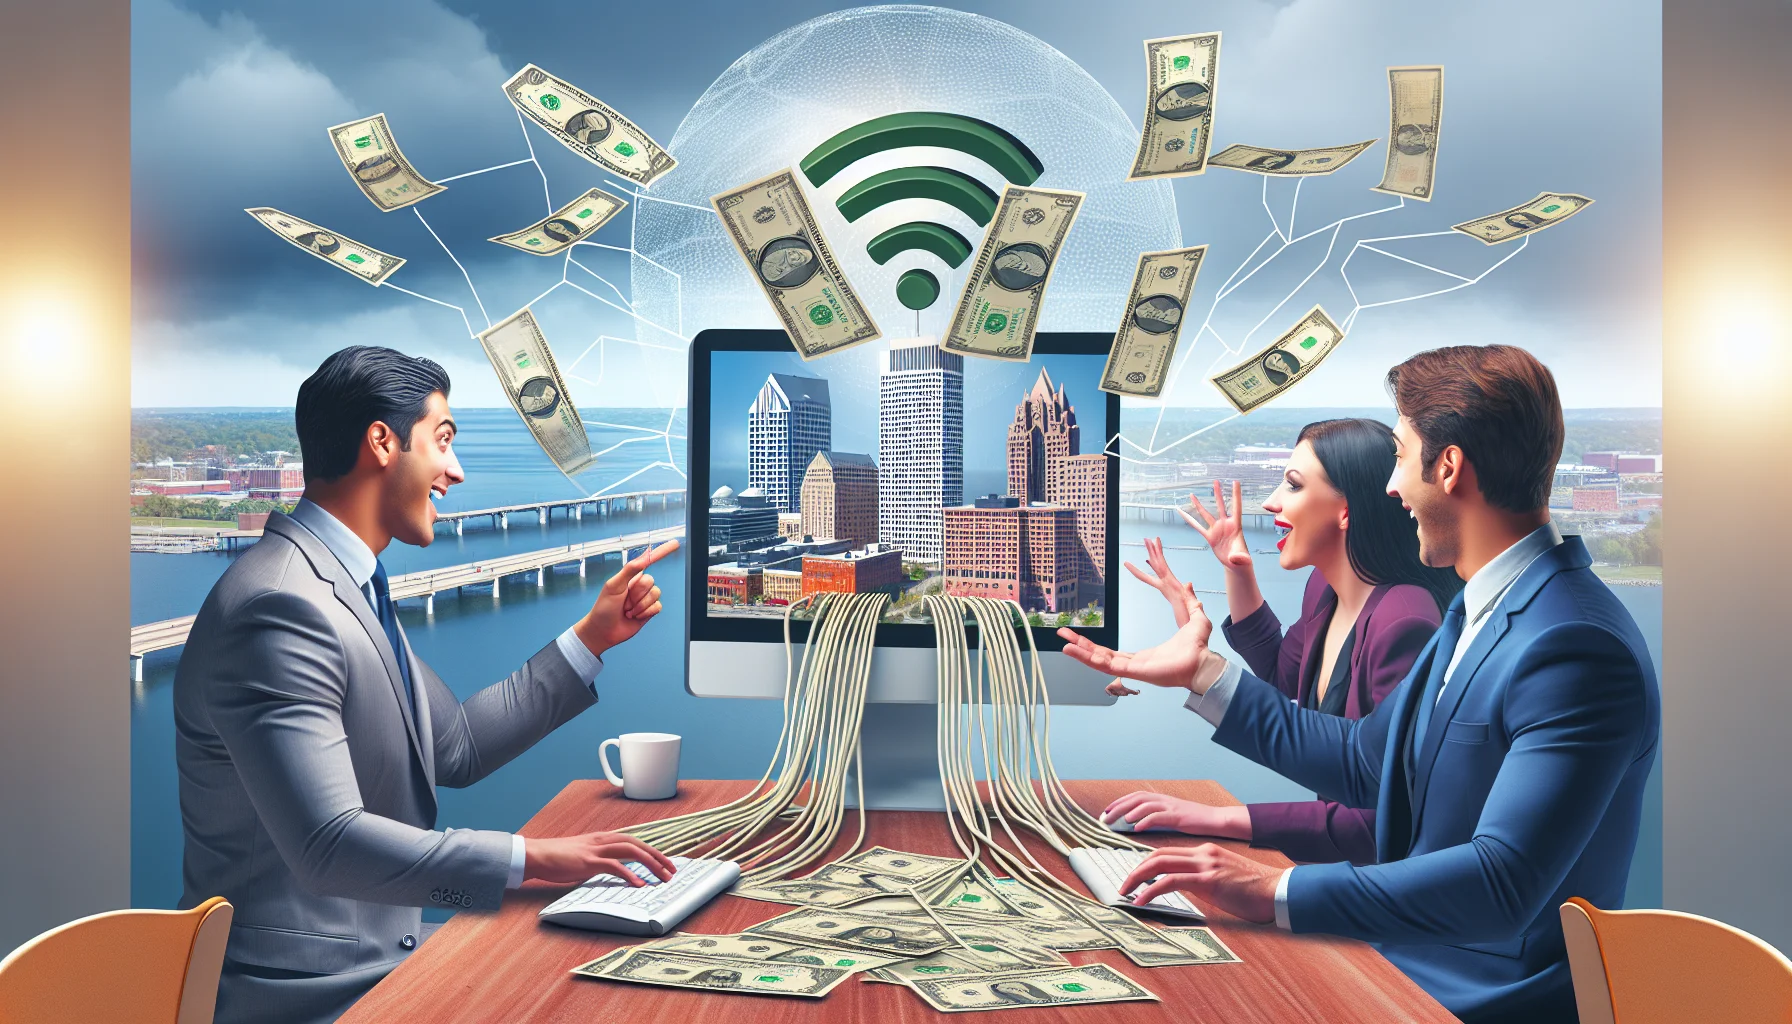 Create a humorous, realistic representation of an affiliate program associated with the city of Milwaukee, situated in a compelling scenario about generating income on the internet. The scene should include a computer, a representation of the Milwaukee skyline, and the internet symbolized through connecting lines or WiFi symbols. Dollar bills symbolizing money being made online should be shown fluttering away from the computer screen to indicate the income flow. Add an array of diverse individuals, including a Caucasian male and a Middle Eastern female, both looking excited and cooperating in this endeavor.